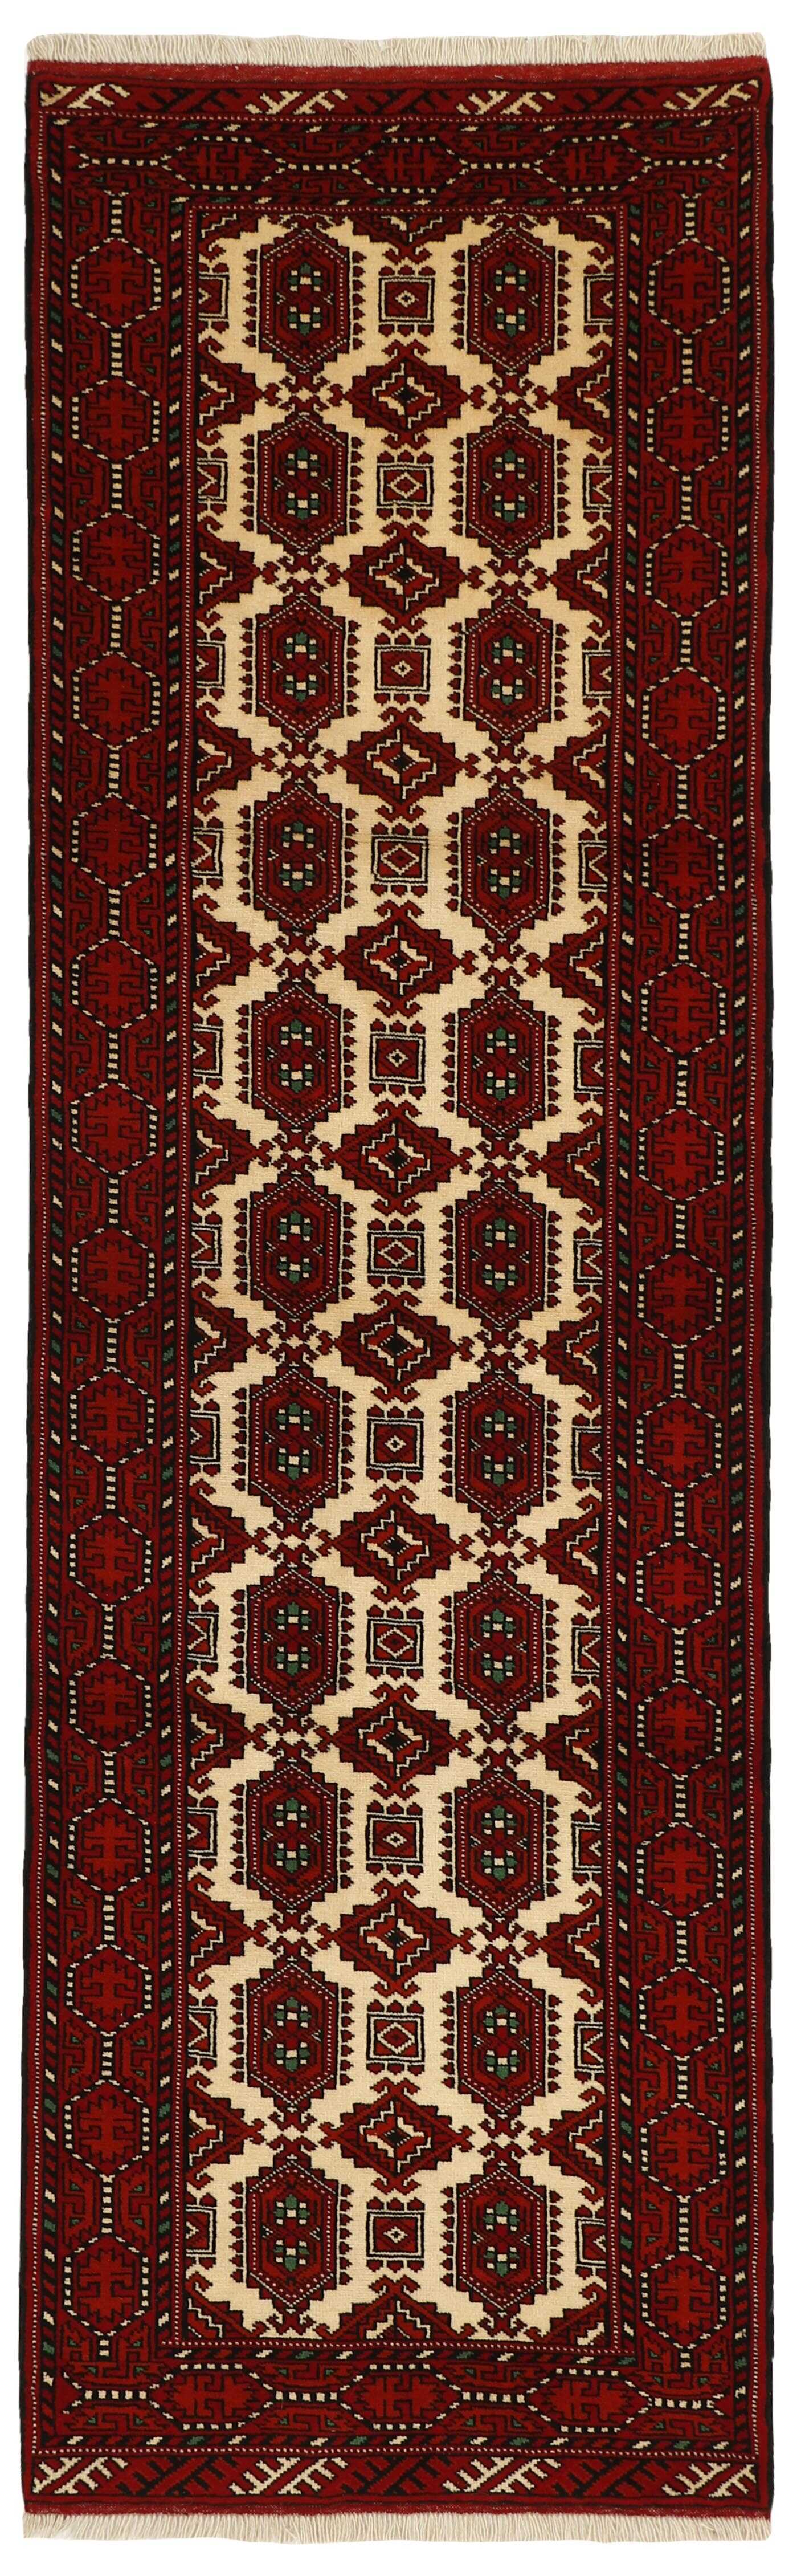 authentic red persian runner